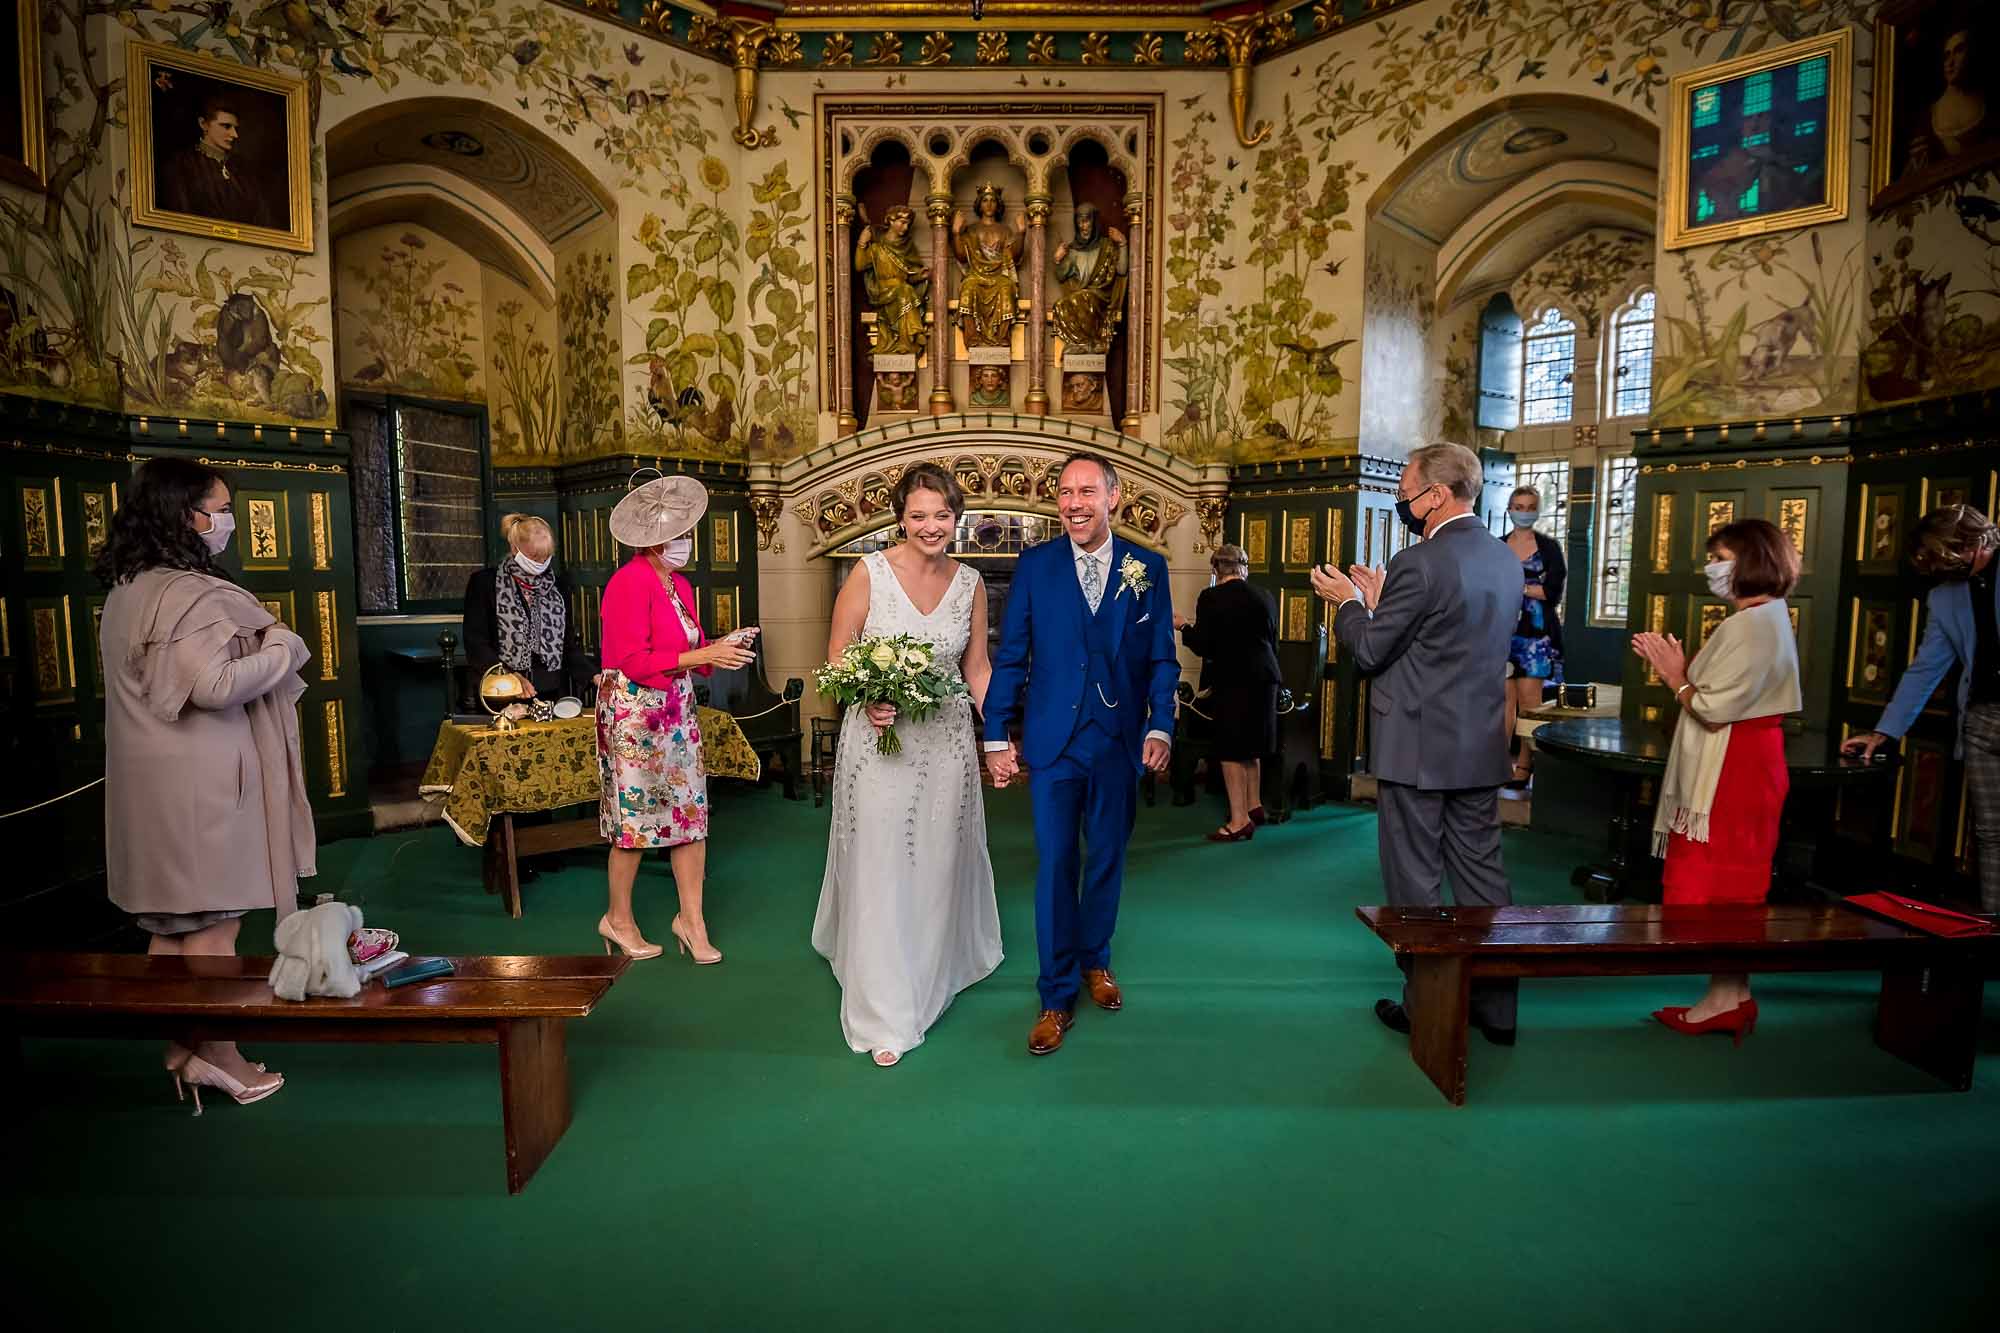 The newly-weds leaving their wedding ceremony at Castell Coch